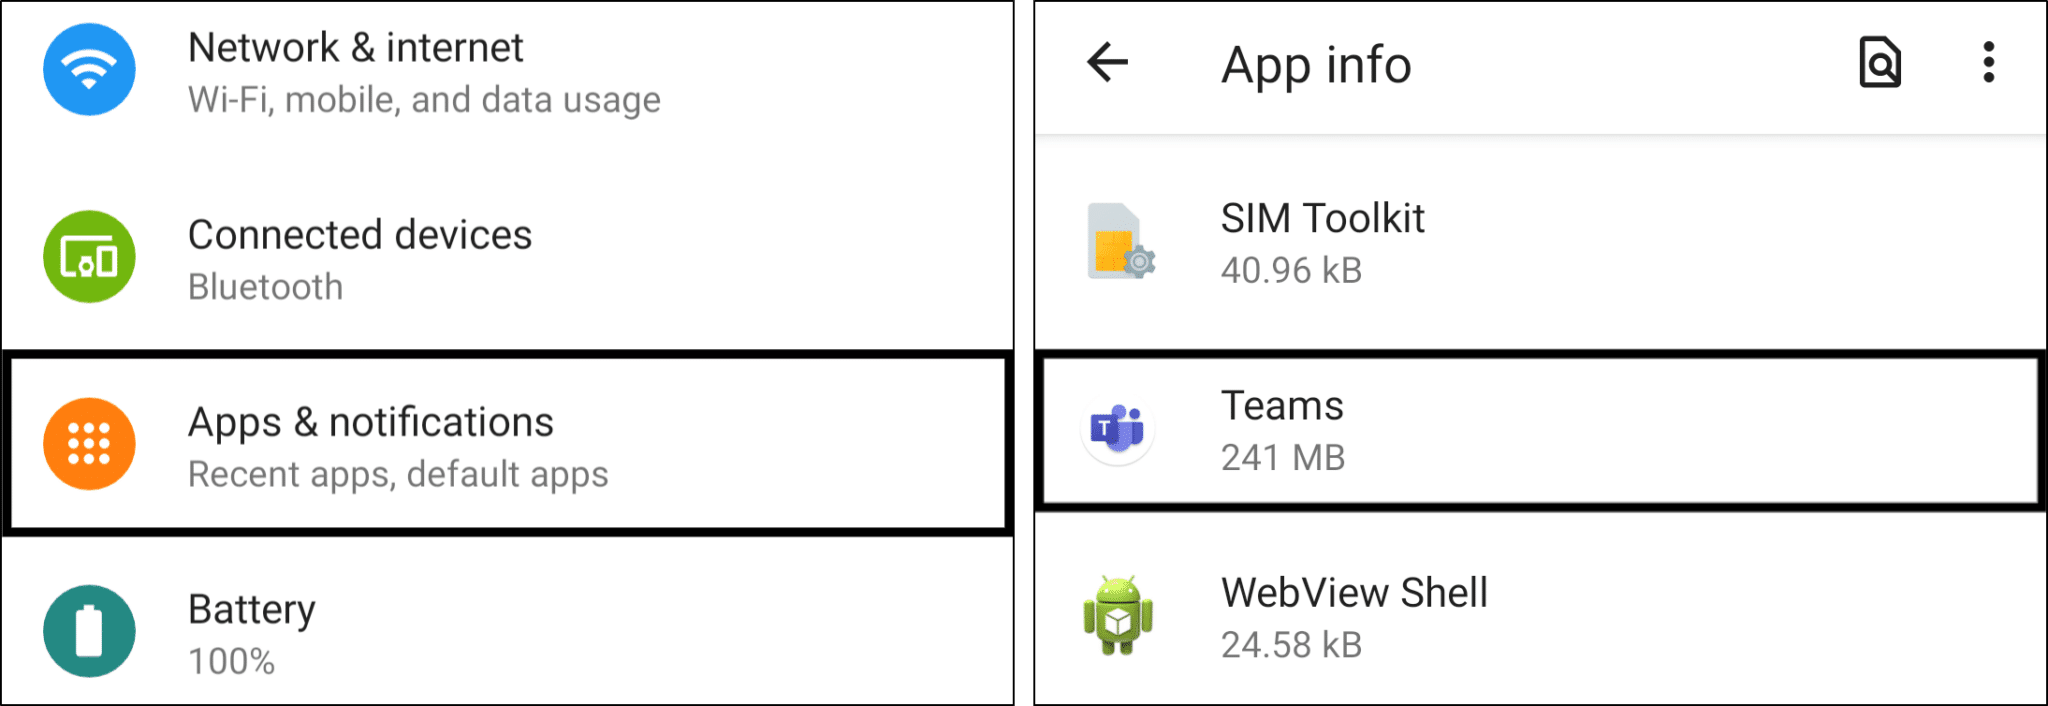 access Microsoft Teams app settings in system settings on Android to clear app cache and data and fix screen share black/blank screen or not working